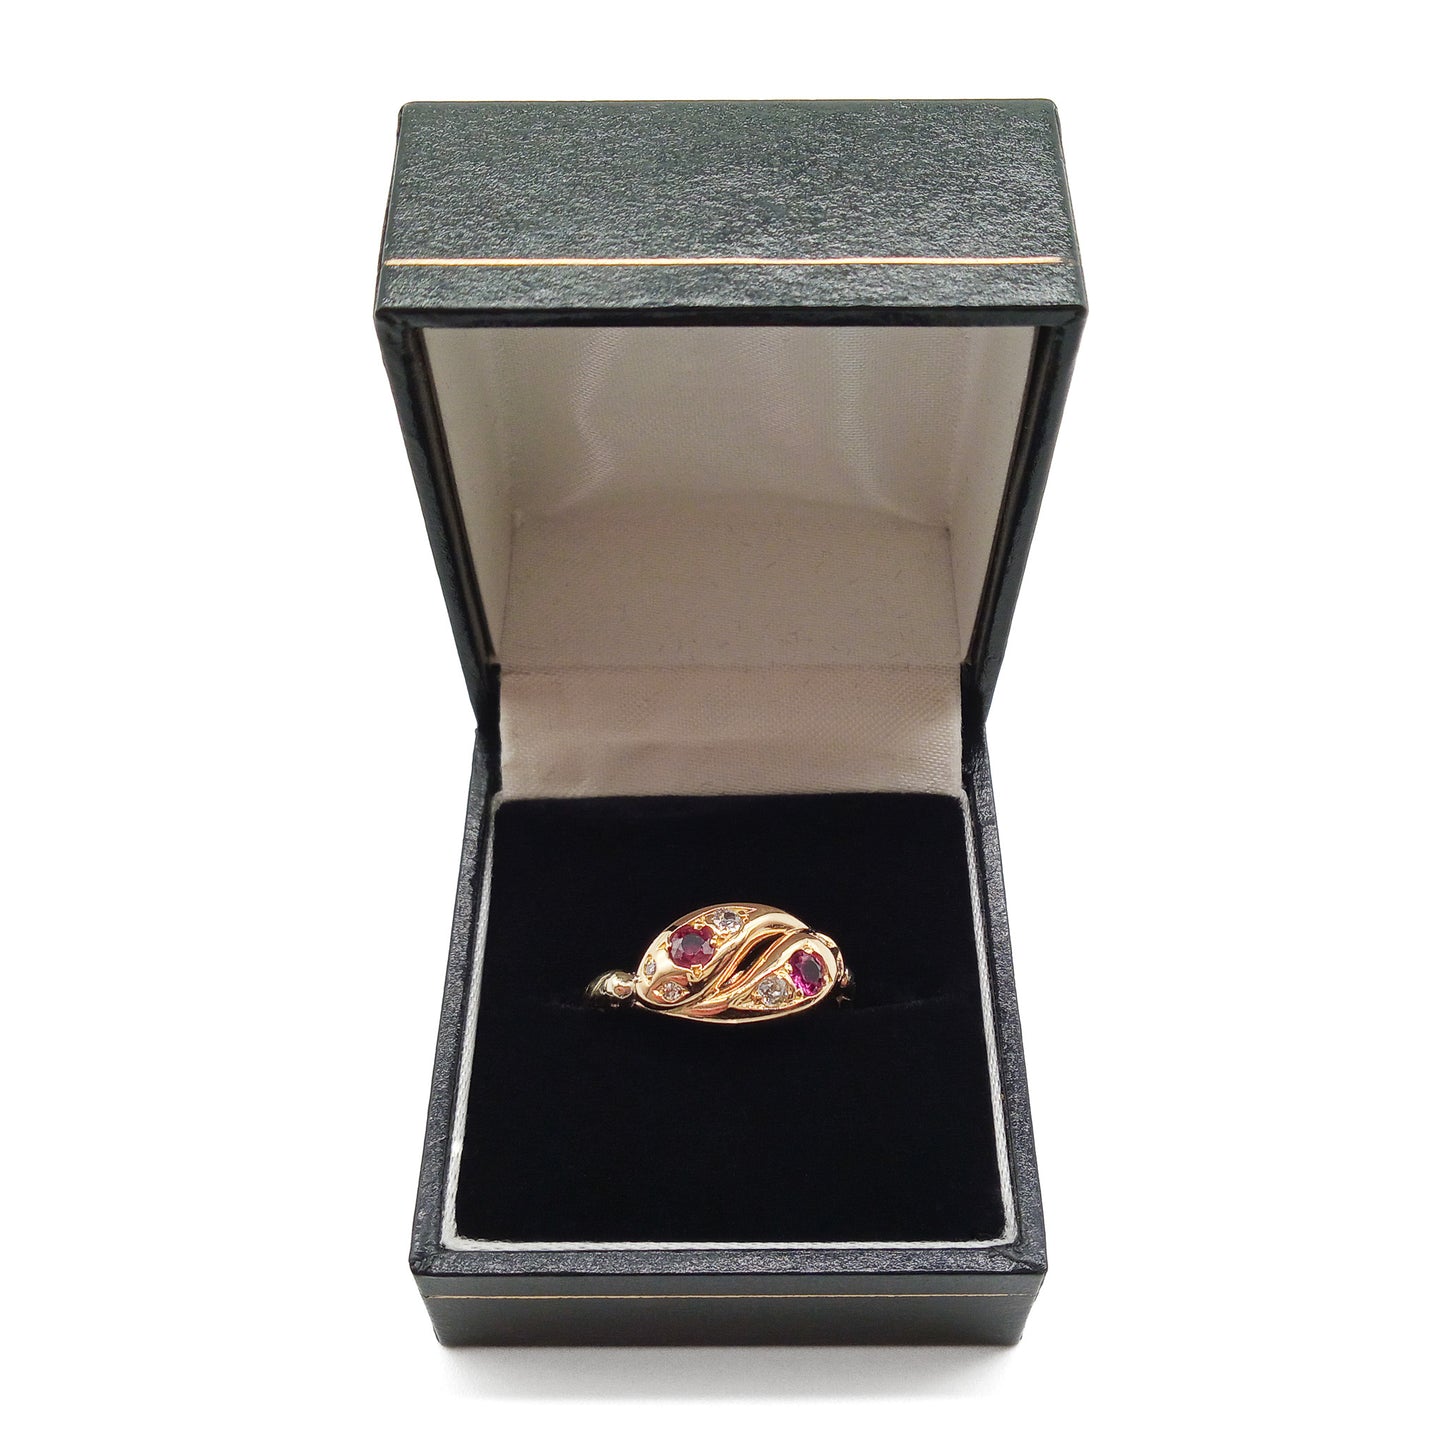 Stunning Victorian 9ct gold snake ring set with two rubies and six old-cut diamonds.